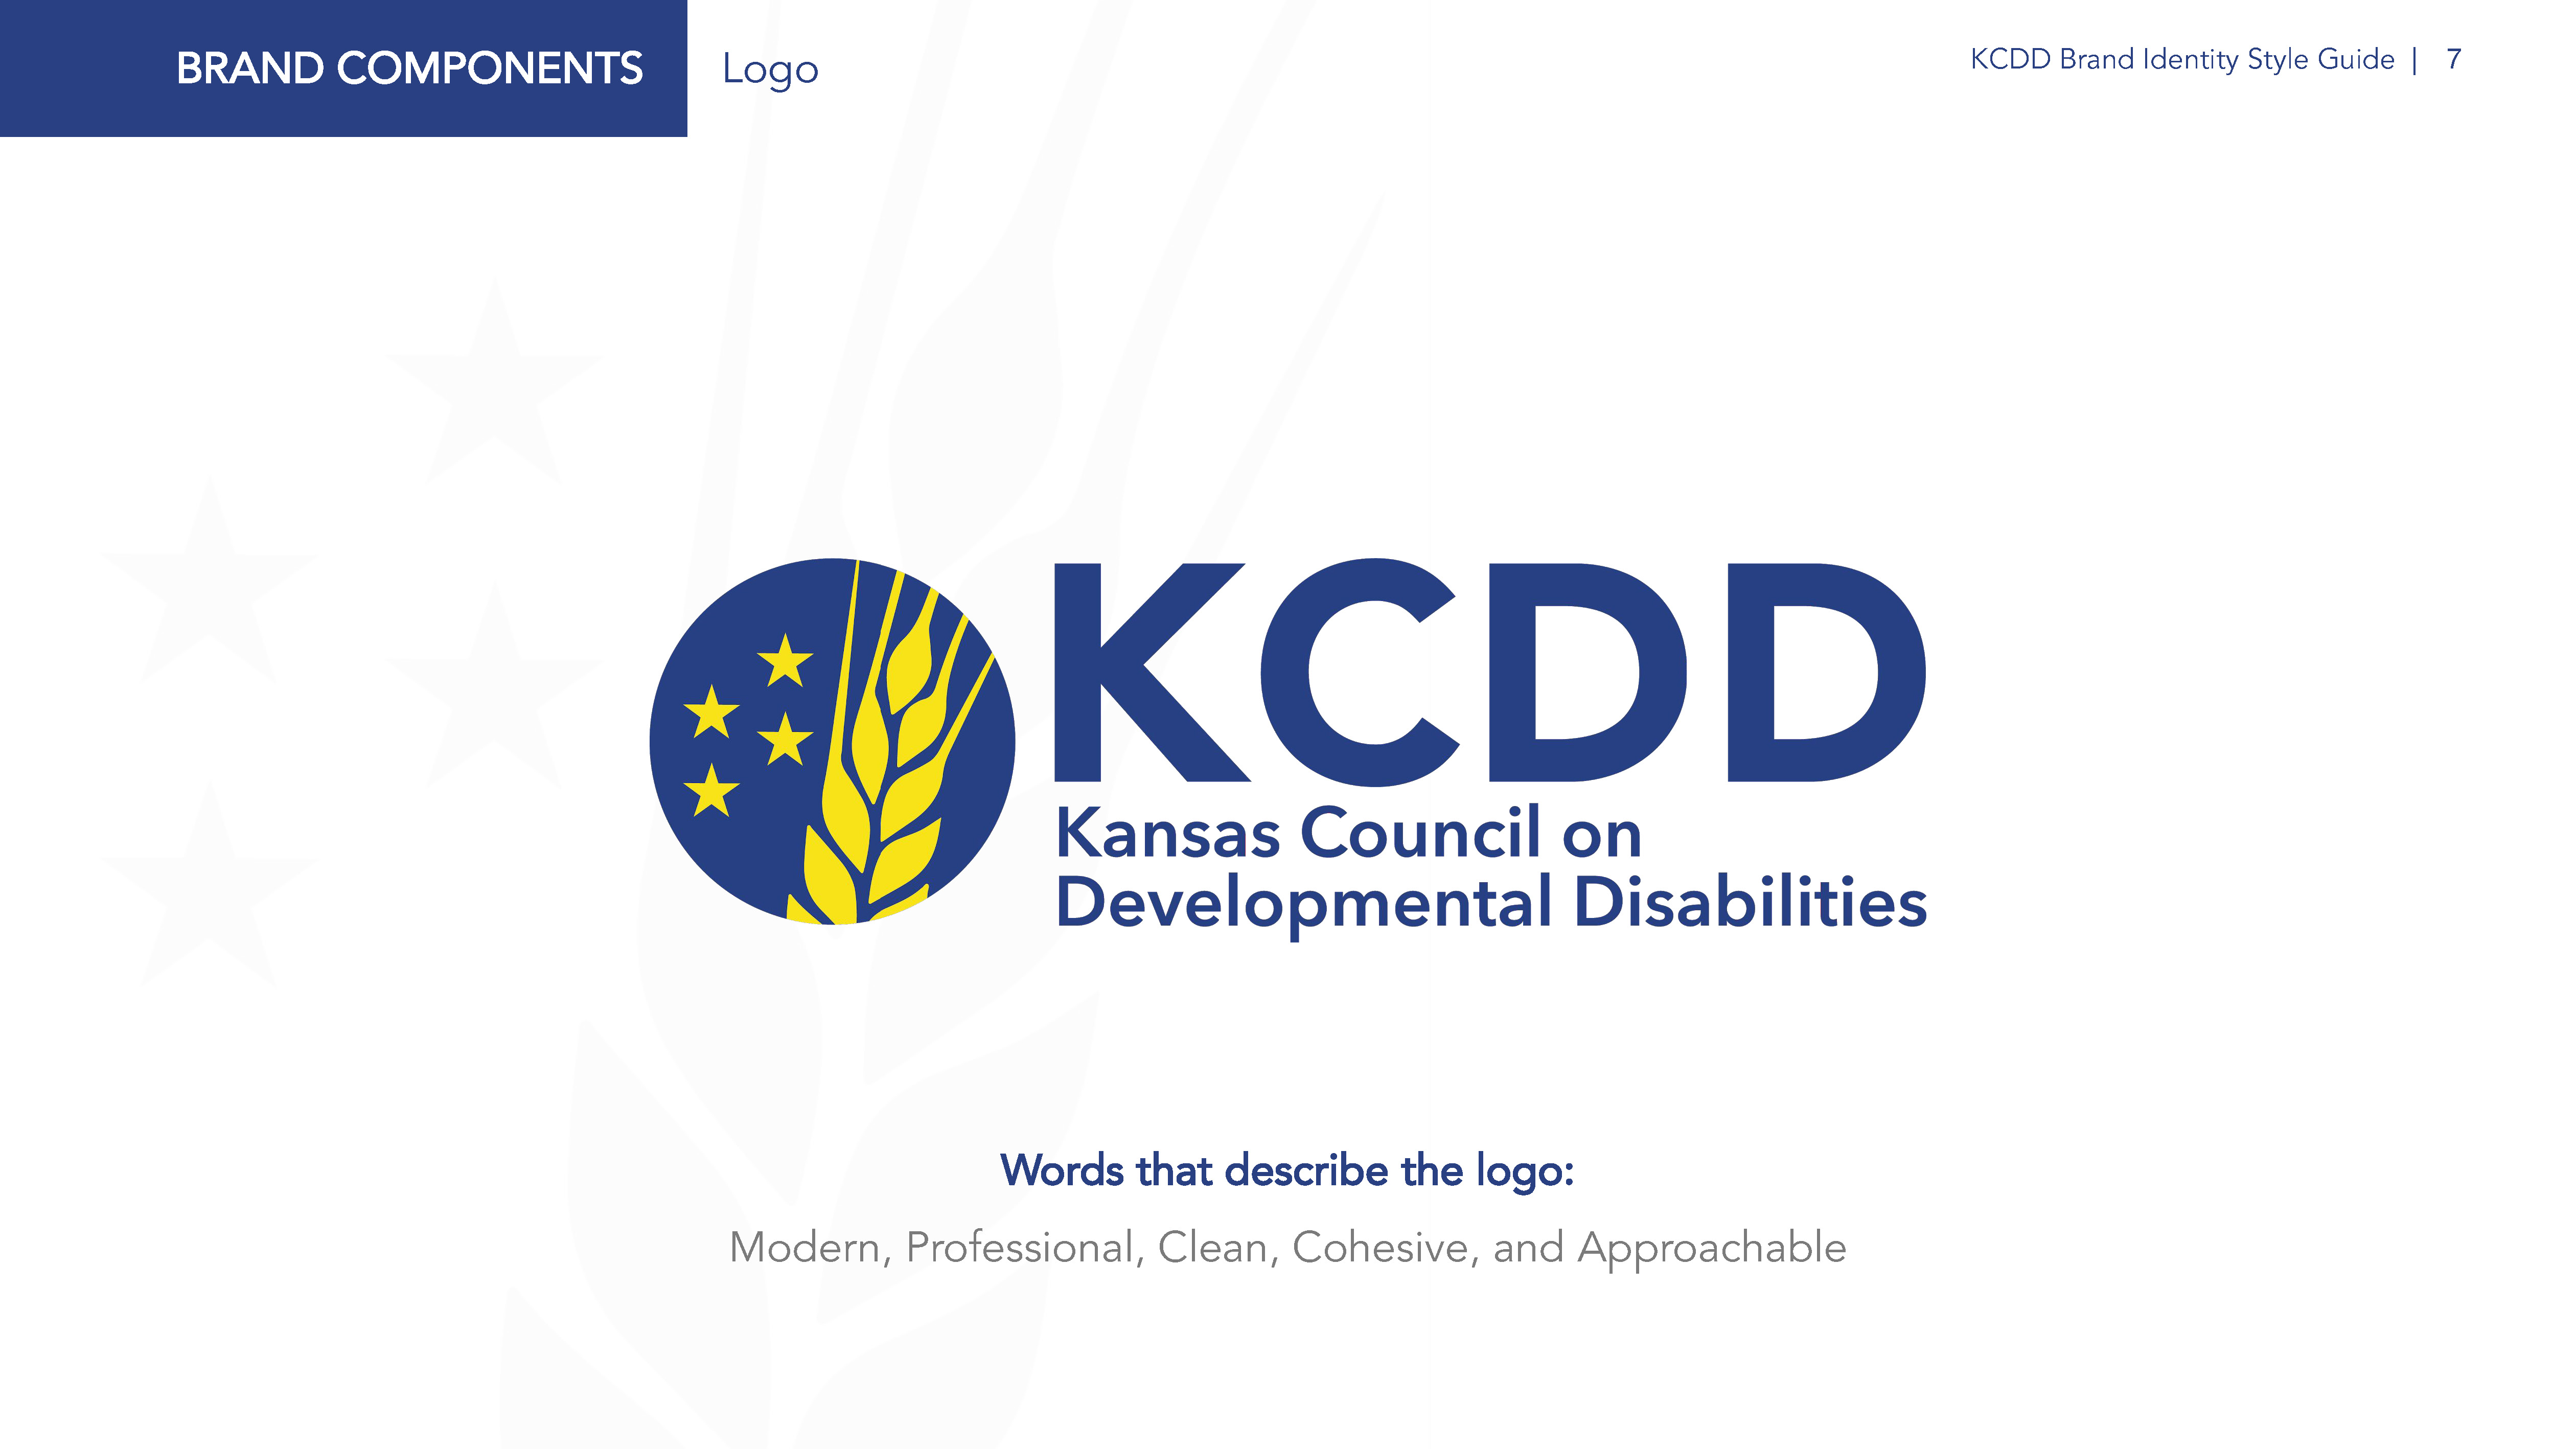 KCDD - KCDD Brand Identity Style Guide Page 07 - New Minds Group